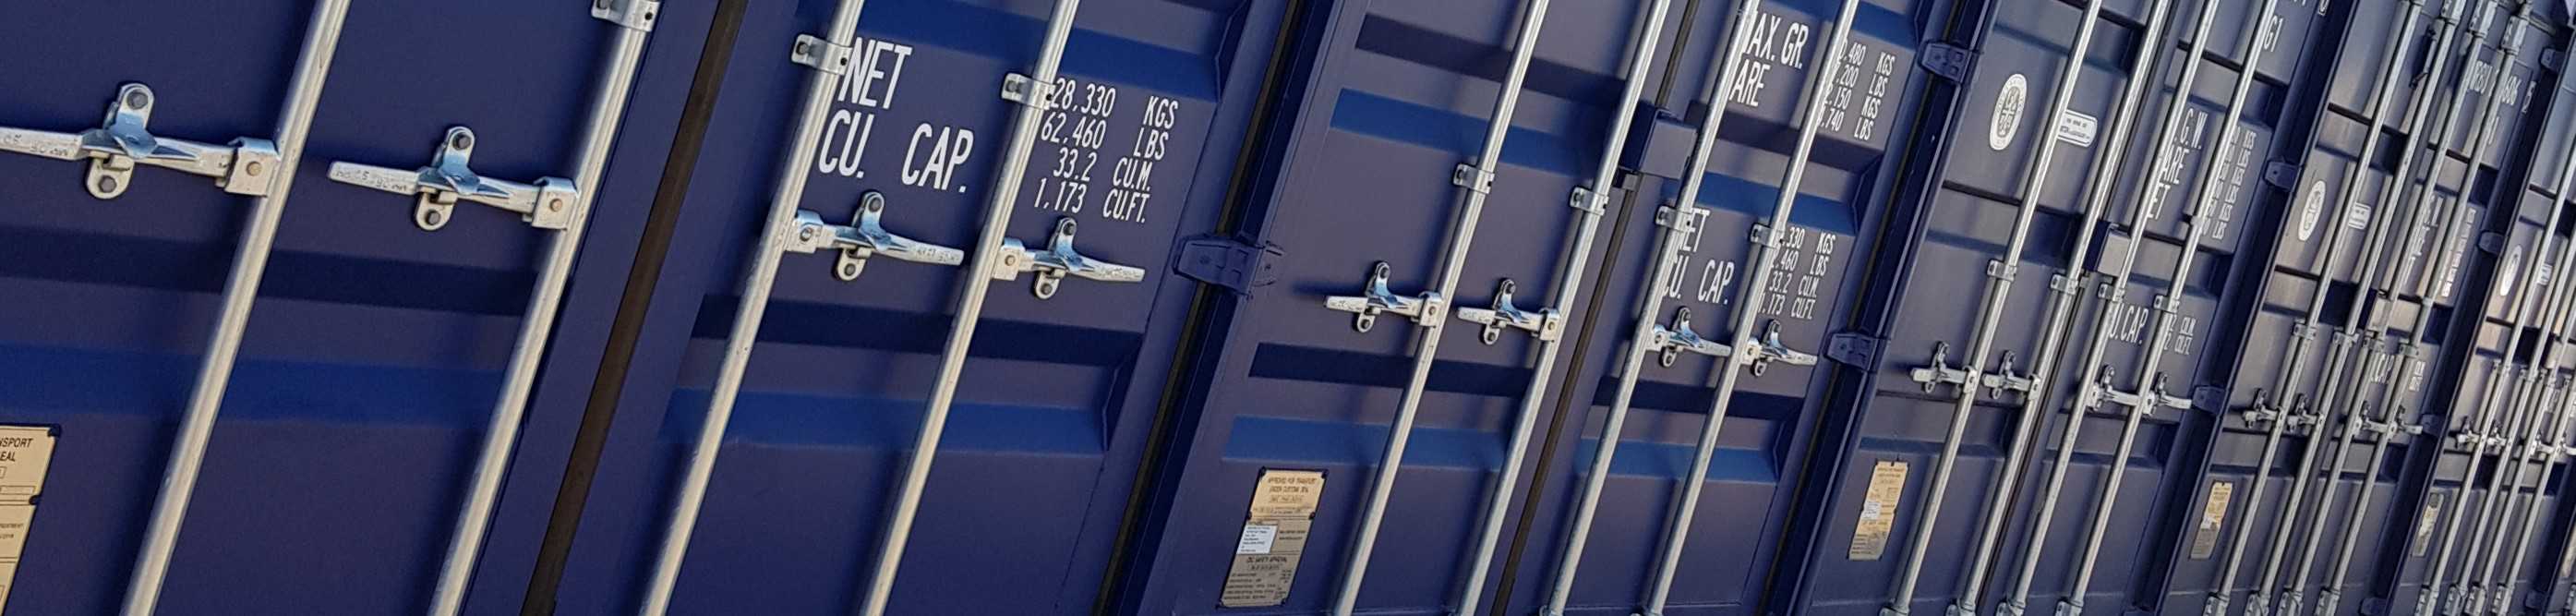 secure self storage containers